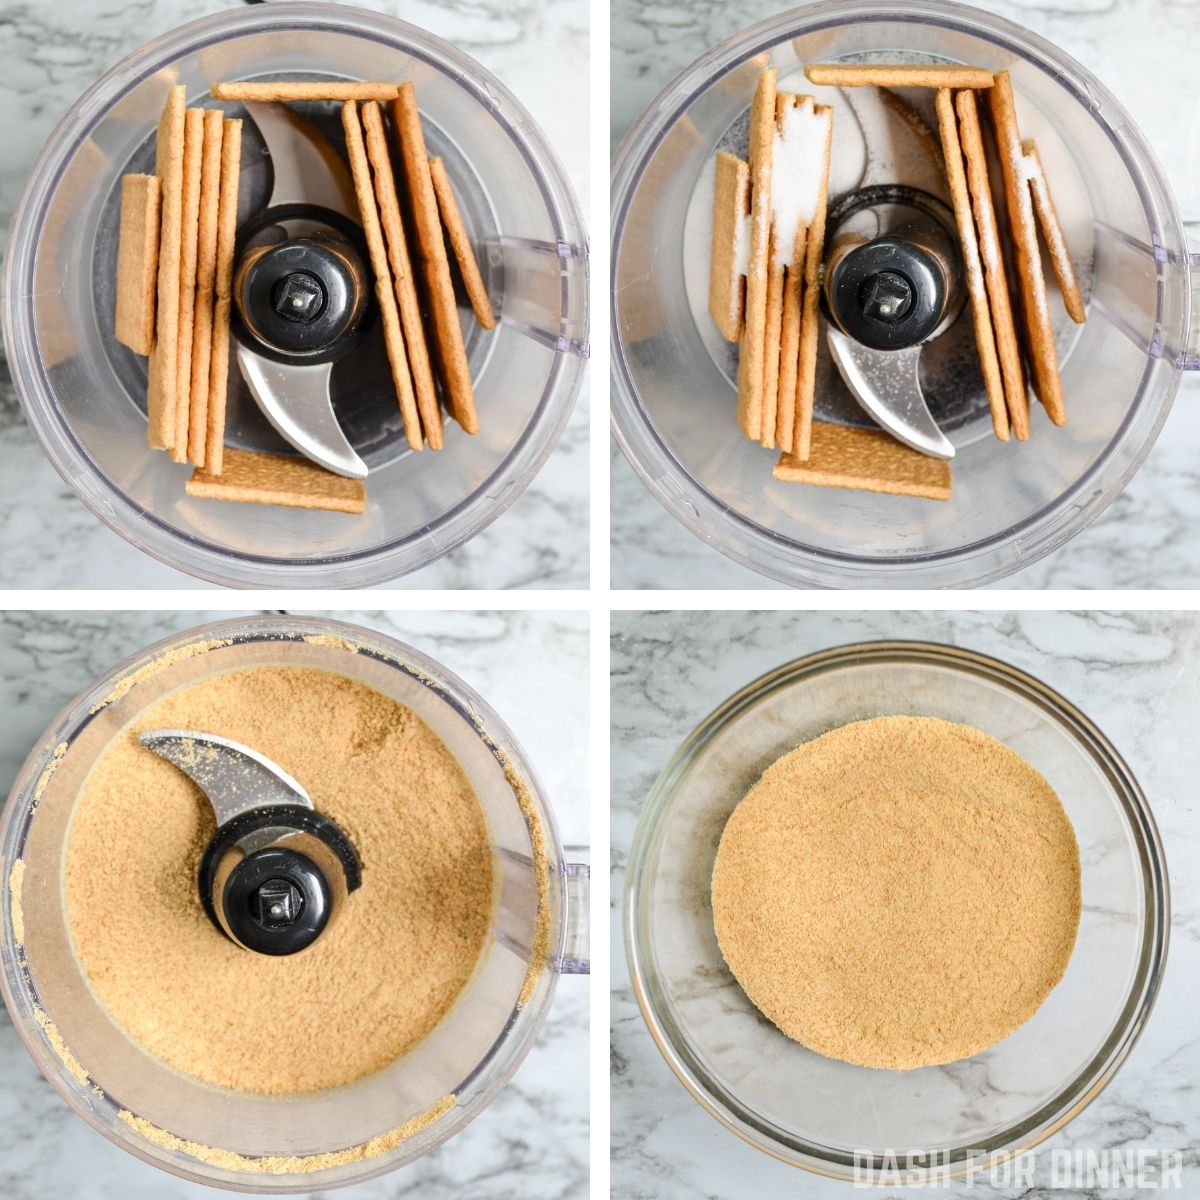 How to crush graham crackers for no bake pies.